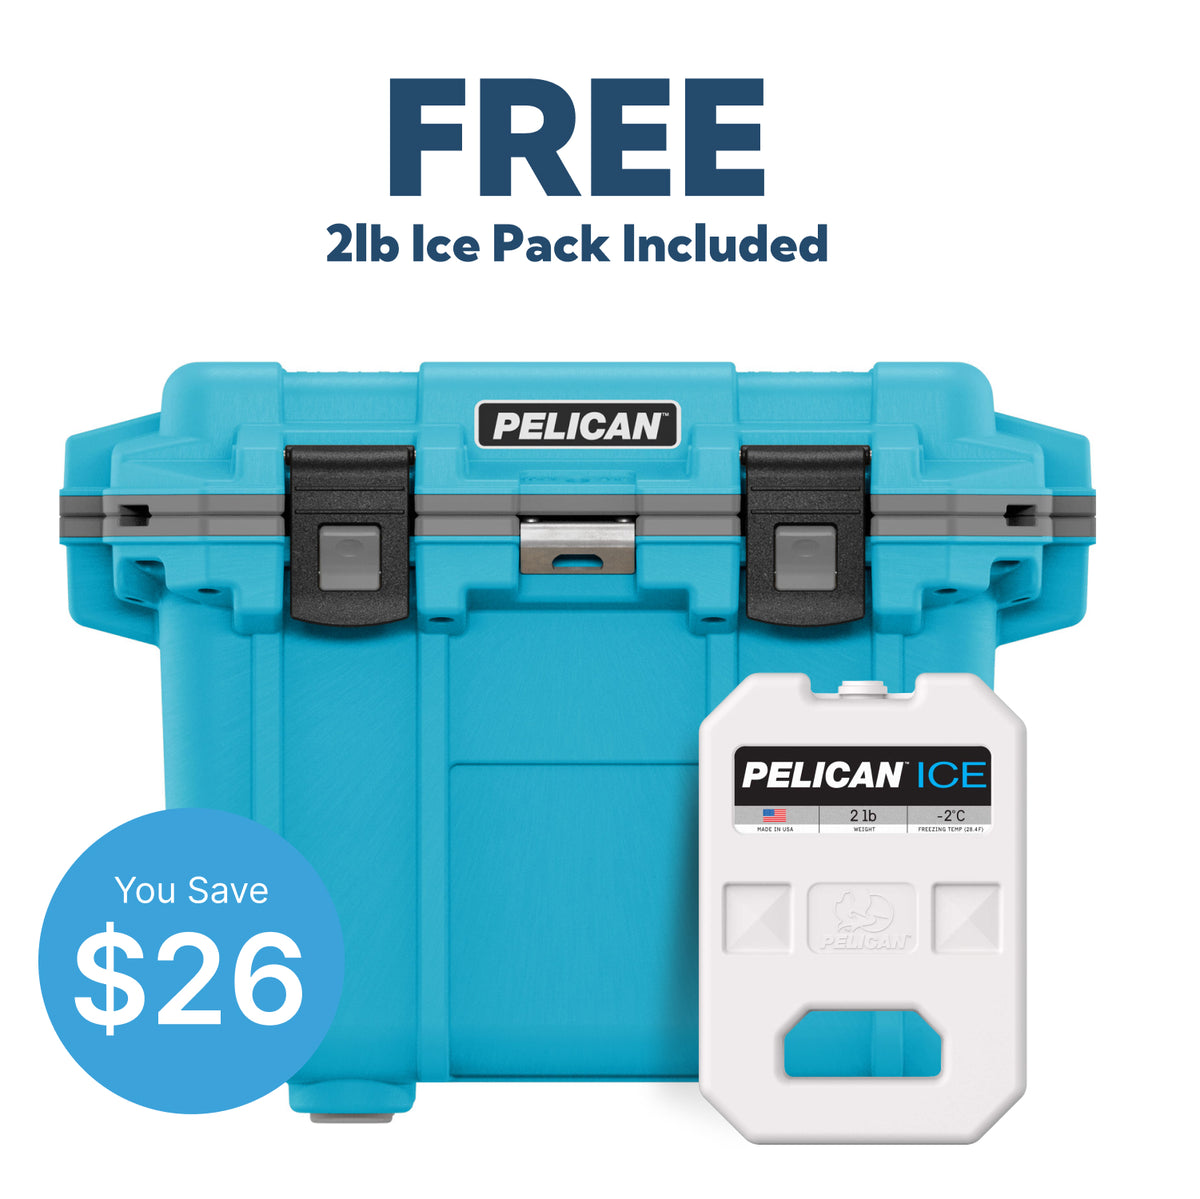 Cool Blue / Grey  Pelican Cooler and 2lb Free Pelican Ice Pack